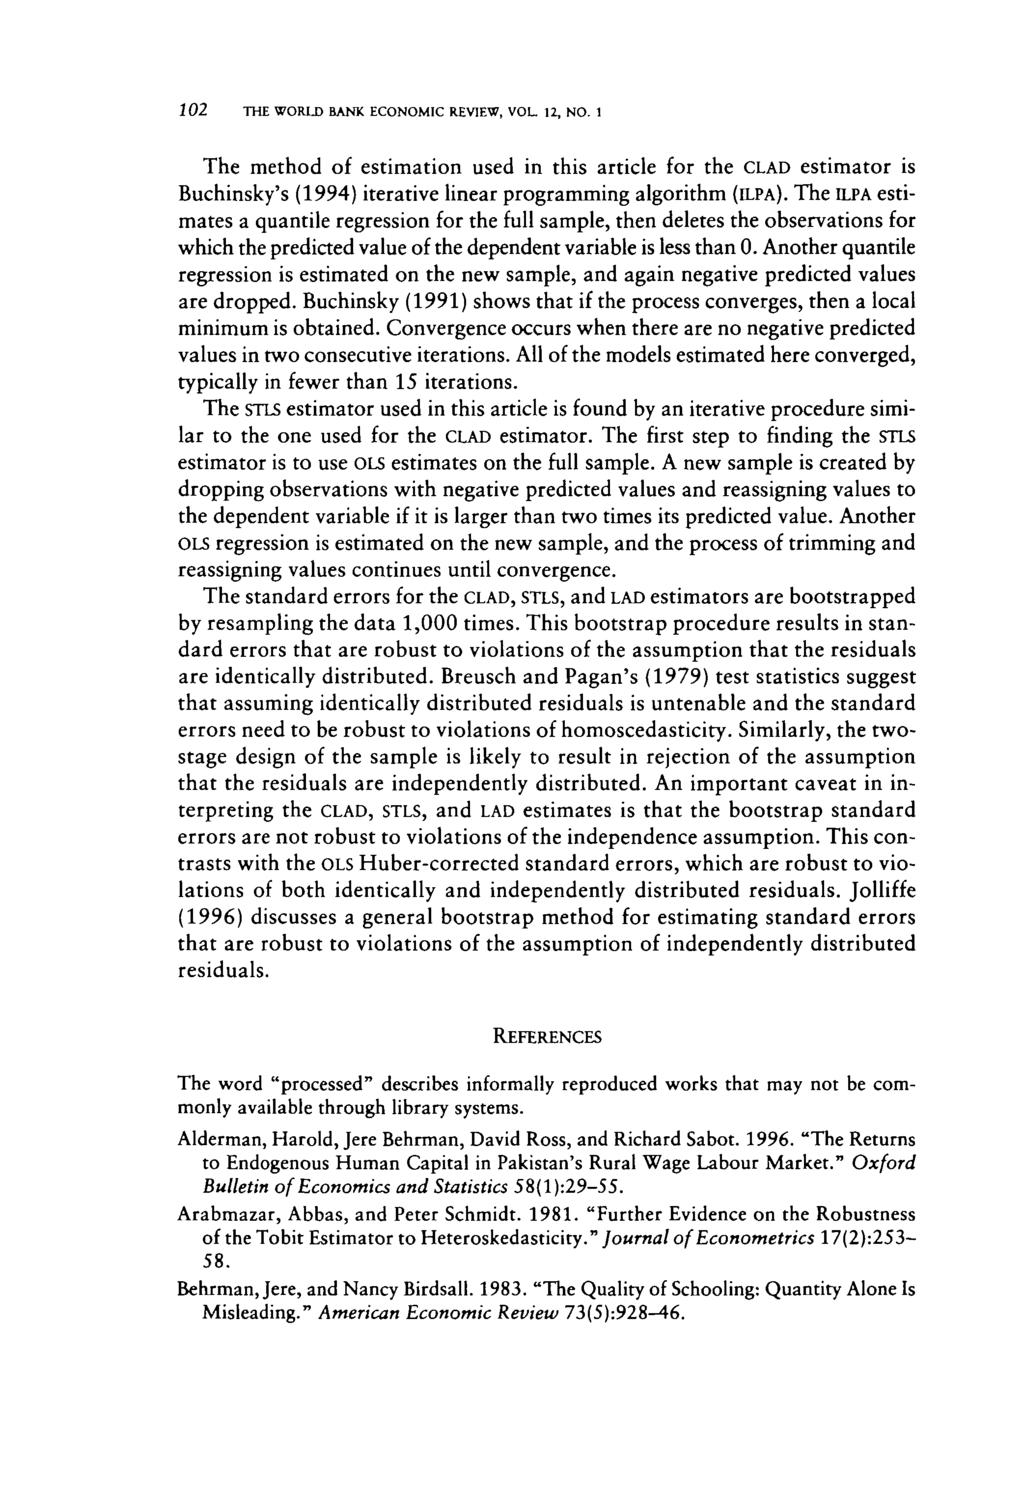 102 THE WORLD BANK ECONOMIC REVIEW, VOL. 12, NO. 1 The method of estimation used in this article for the CLAD estimator is Buchinsky's (1994) iterative linear programming algorithm (ILPA).